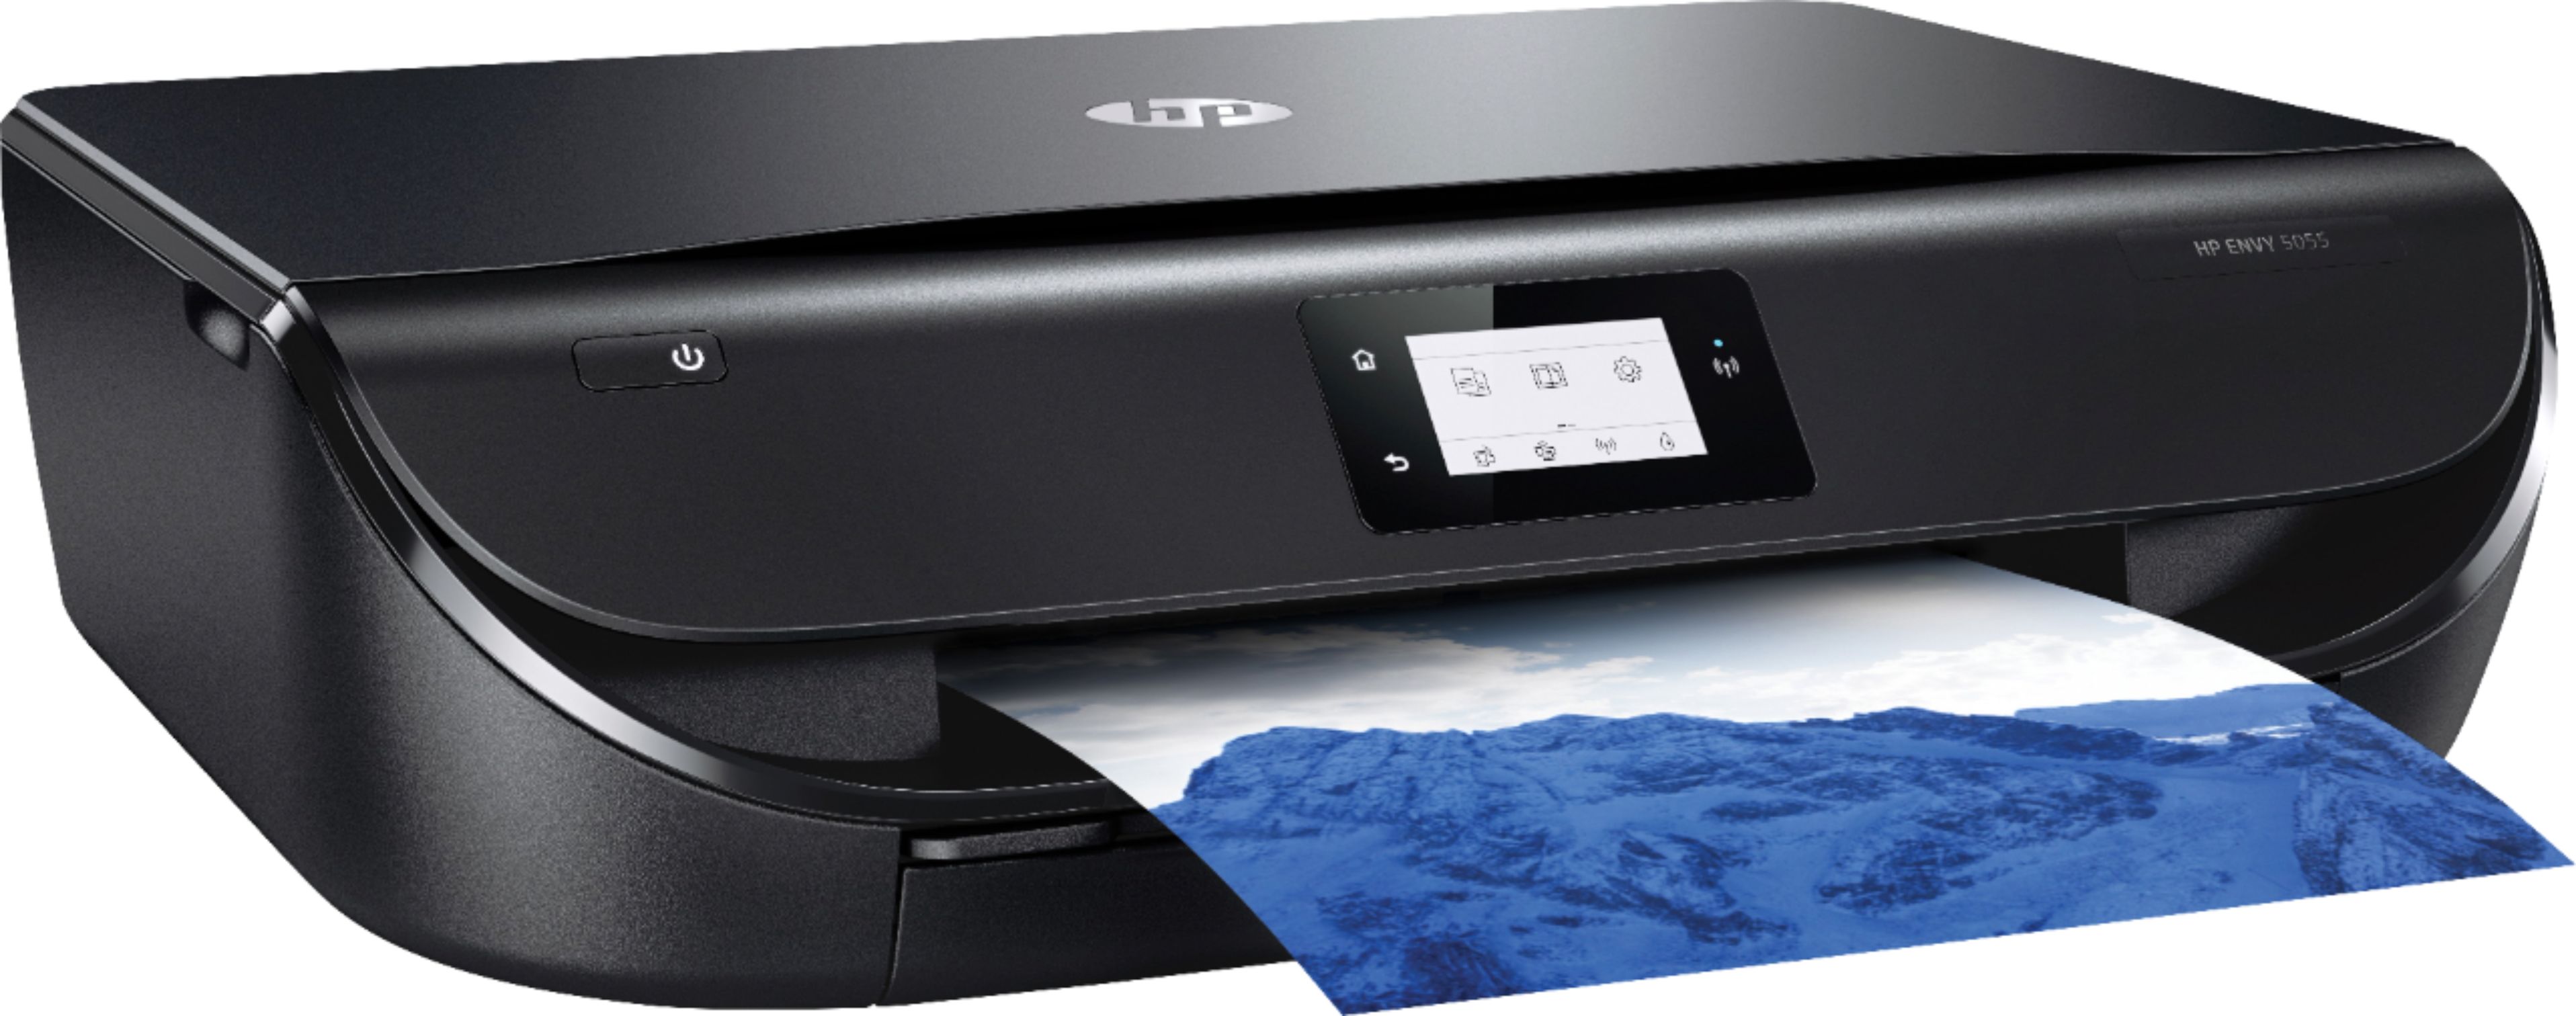 cheap hp printers for sale